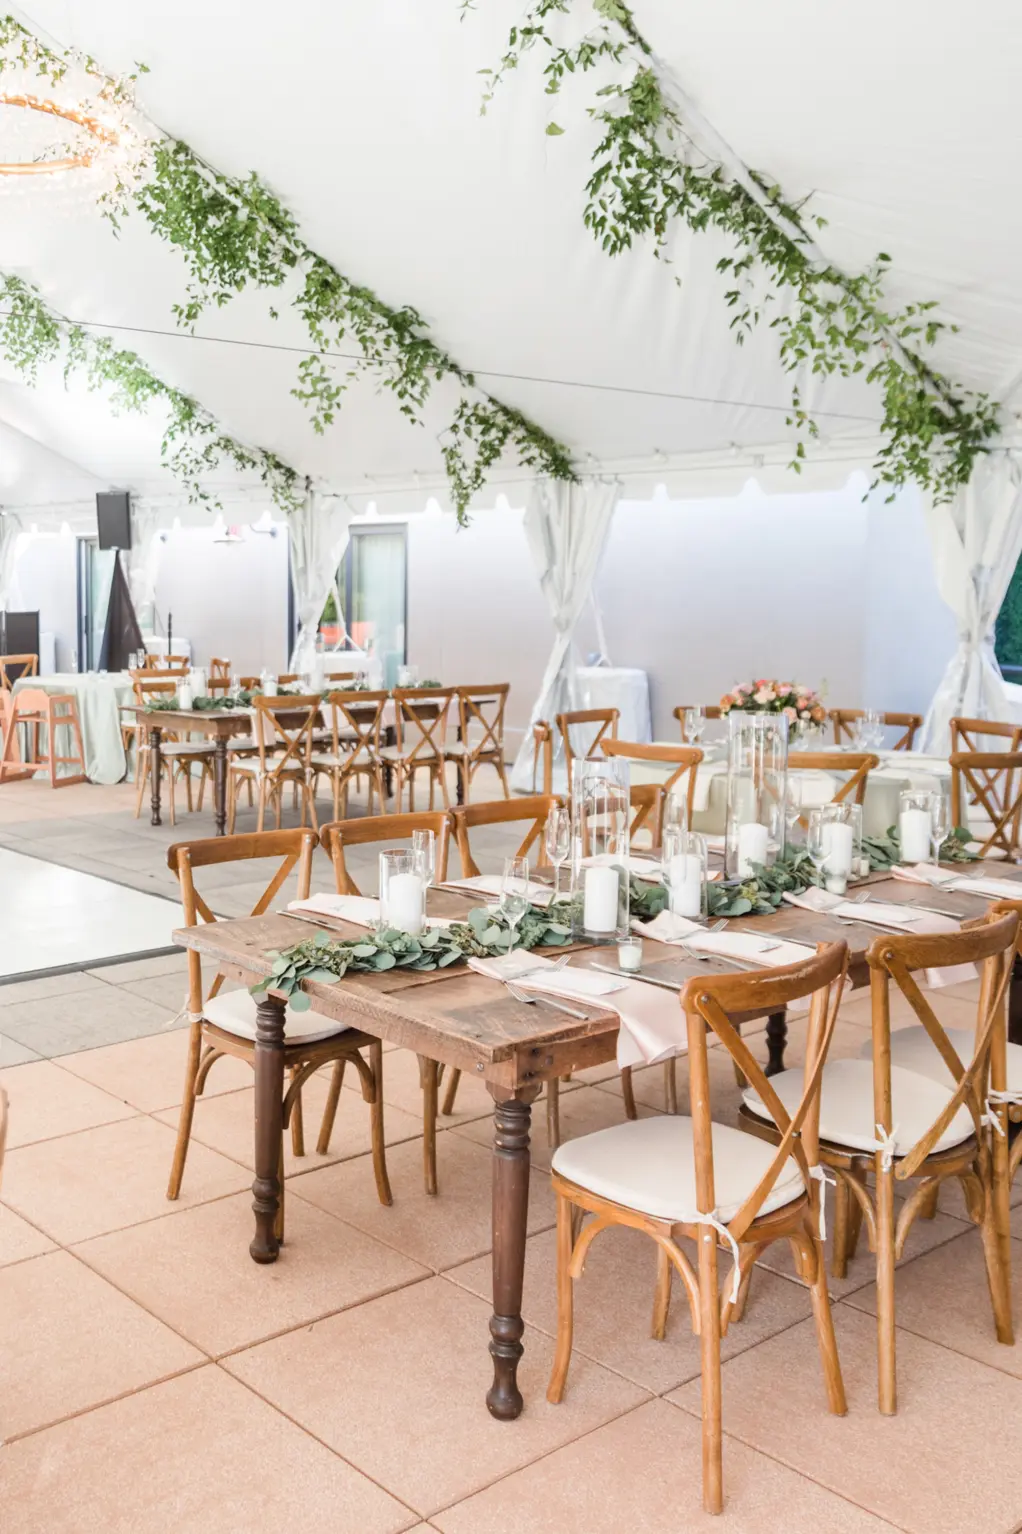 White Tented Boho Wedding Reception with Hanging Eucalyptus | Farmhouse Tables and Wooden Crossback Chairs | Tampa Bay Kate Ryan Event Rentals